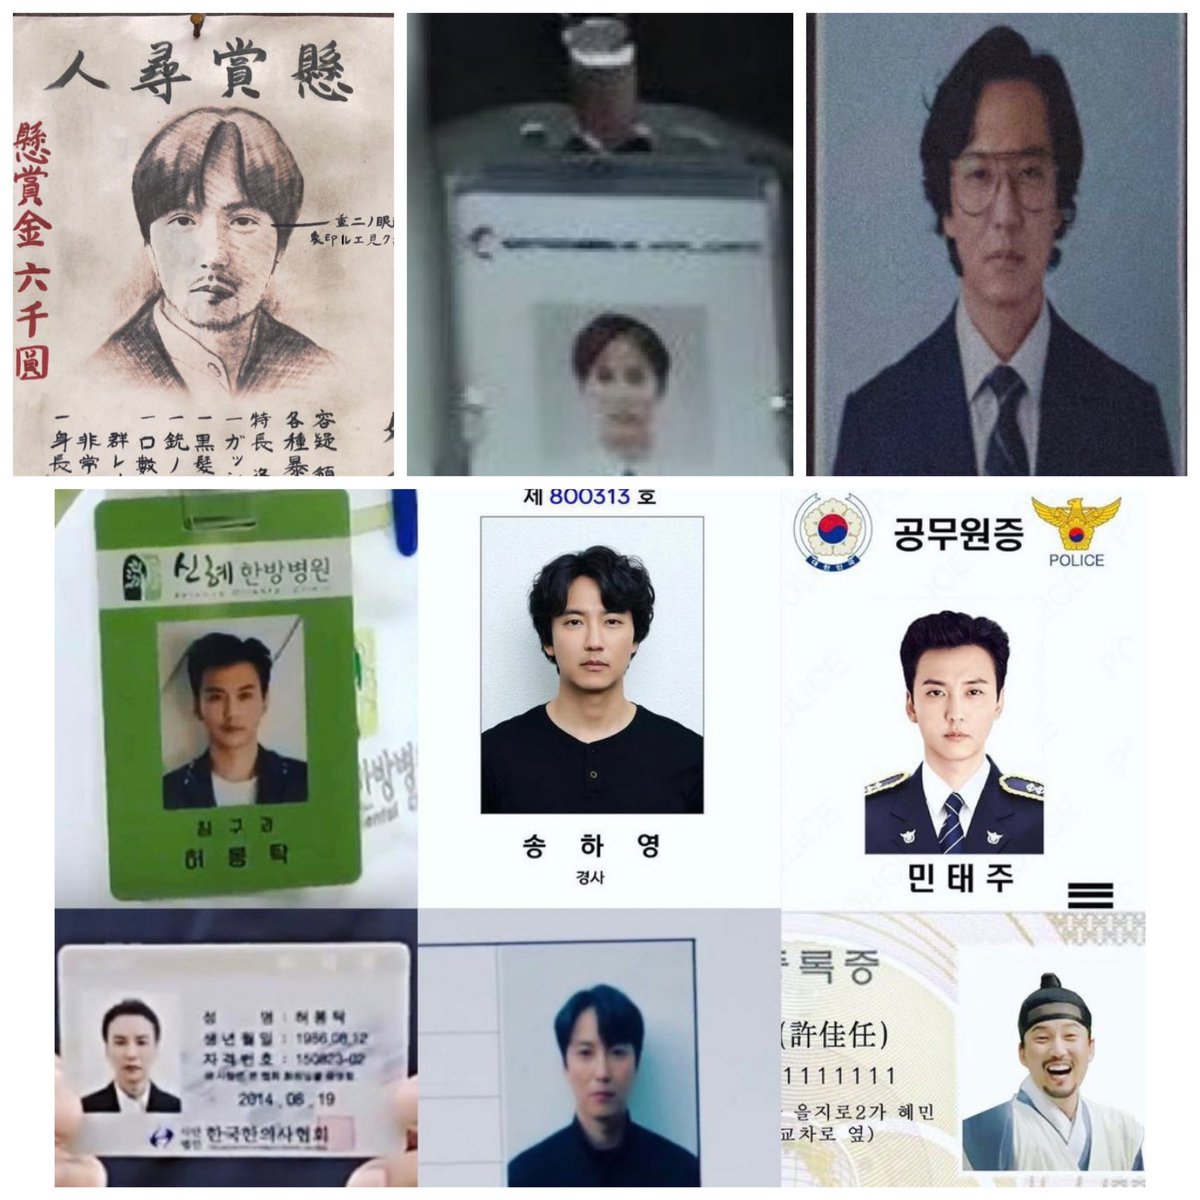 Namgil’s character IDs / portraits

Lee Yoon is swag 😅
#SongOfTheBandits
#EmergencyDeclaration
#TheHunt
 #LiveUpToYourName
#ThroughTheDarkness
#MemoirsOfAMurderer
#TheFieryPriest
 #KIMNAMGIL